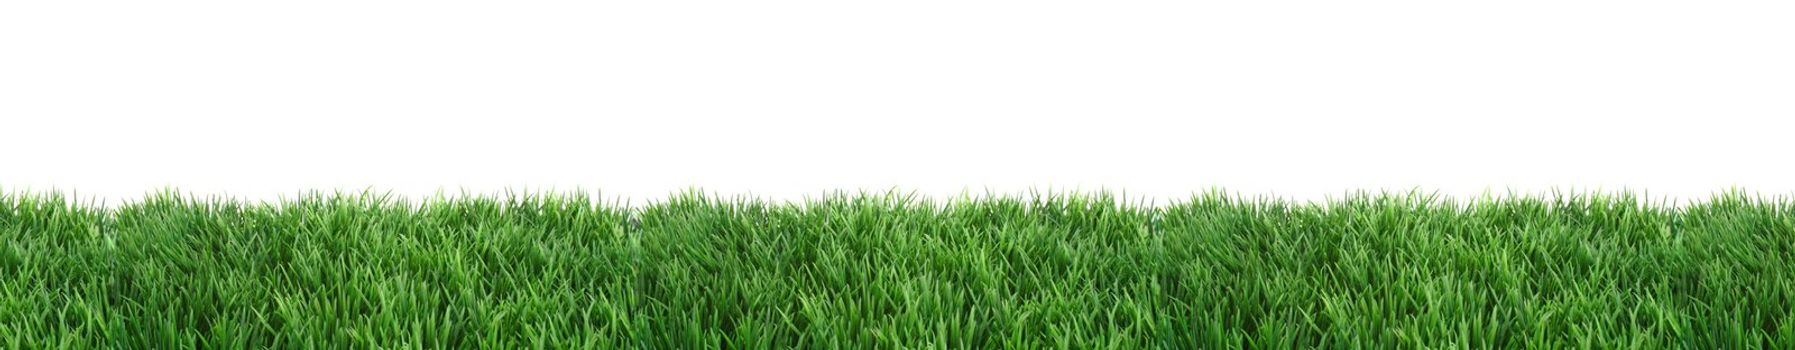 A fine green lawn in front of a plain white background.